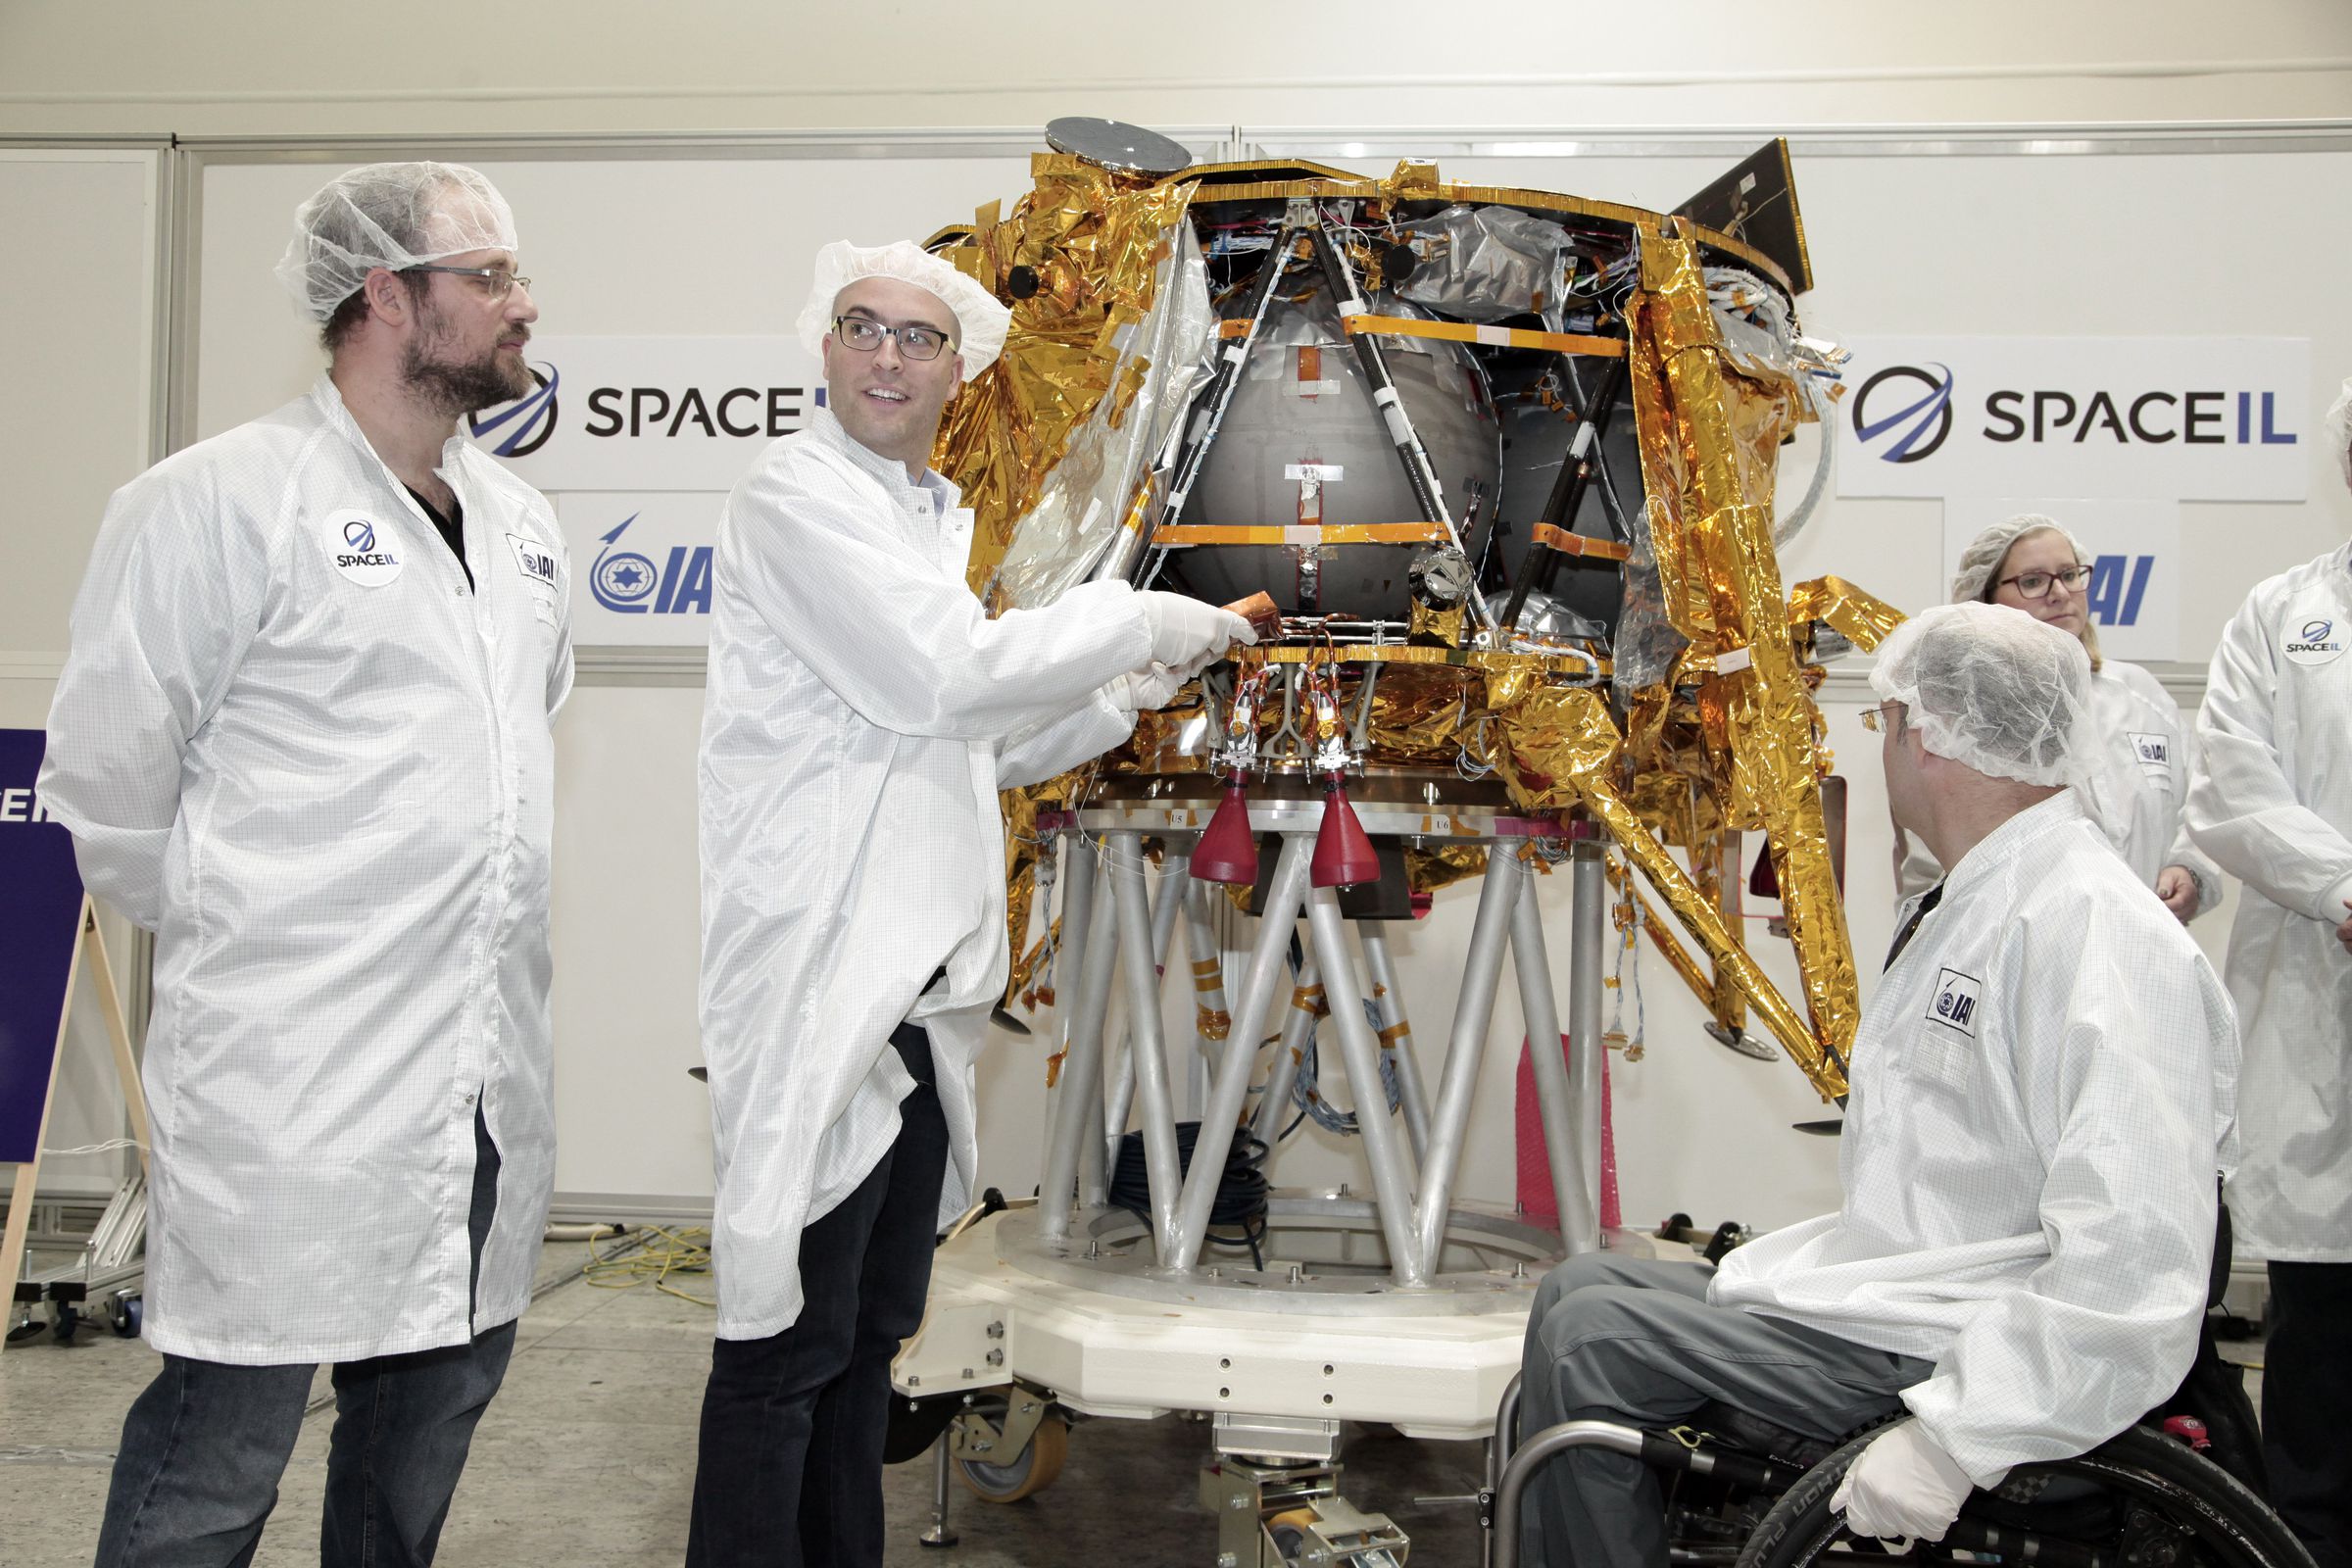 The SpaceIL team with the lander before launch.